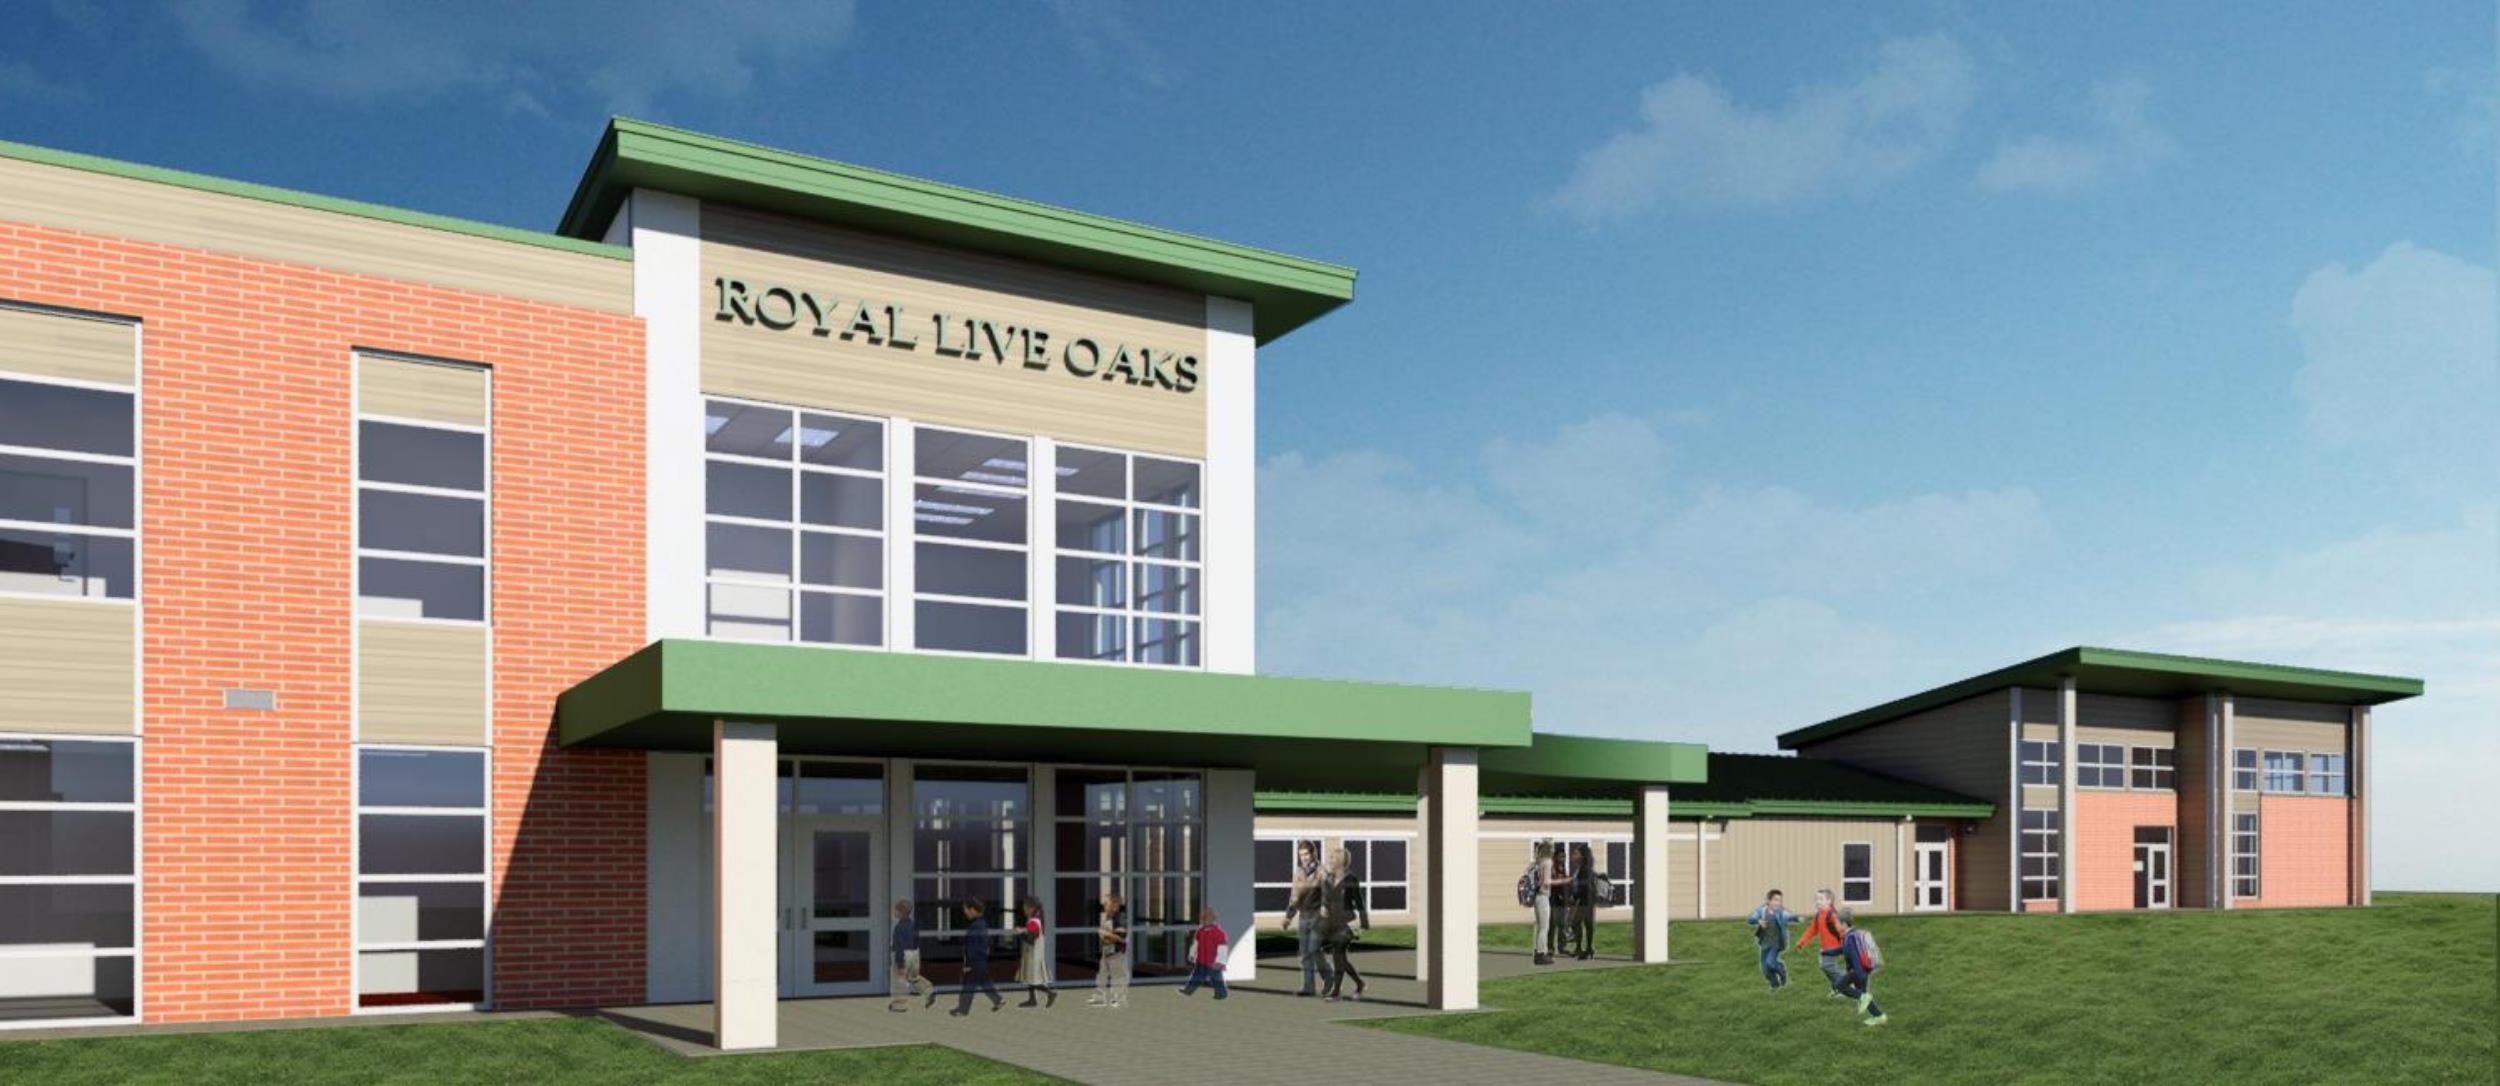 royal-live-oaks-architects-rendering